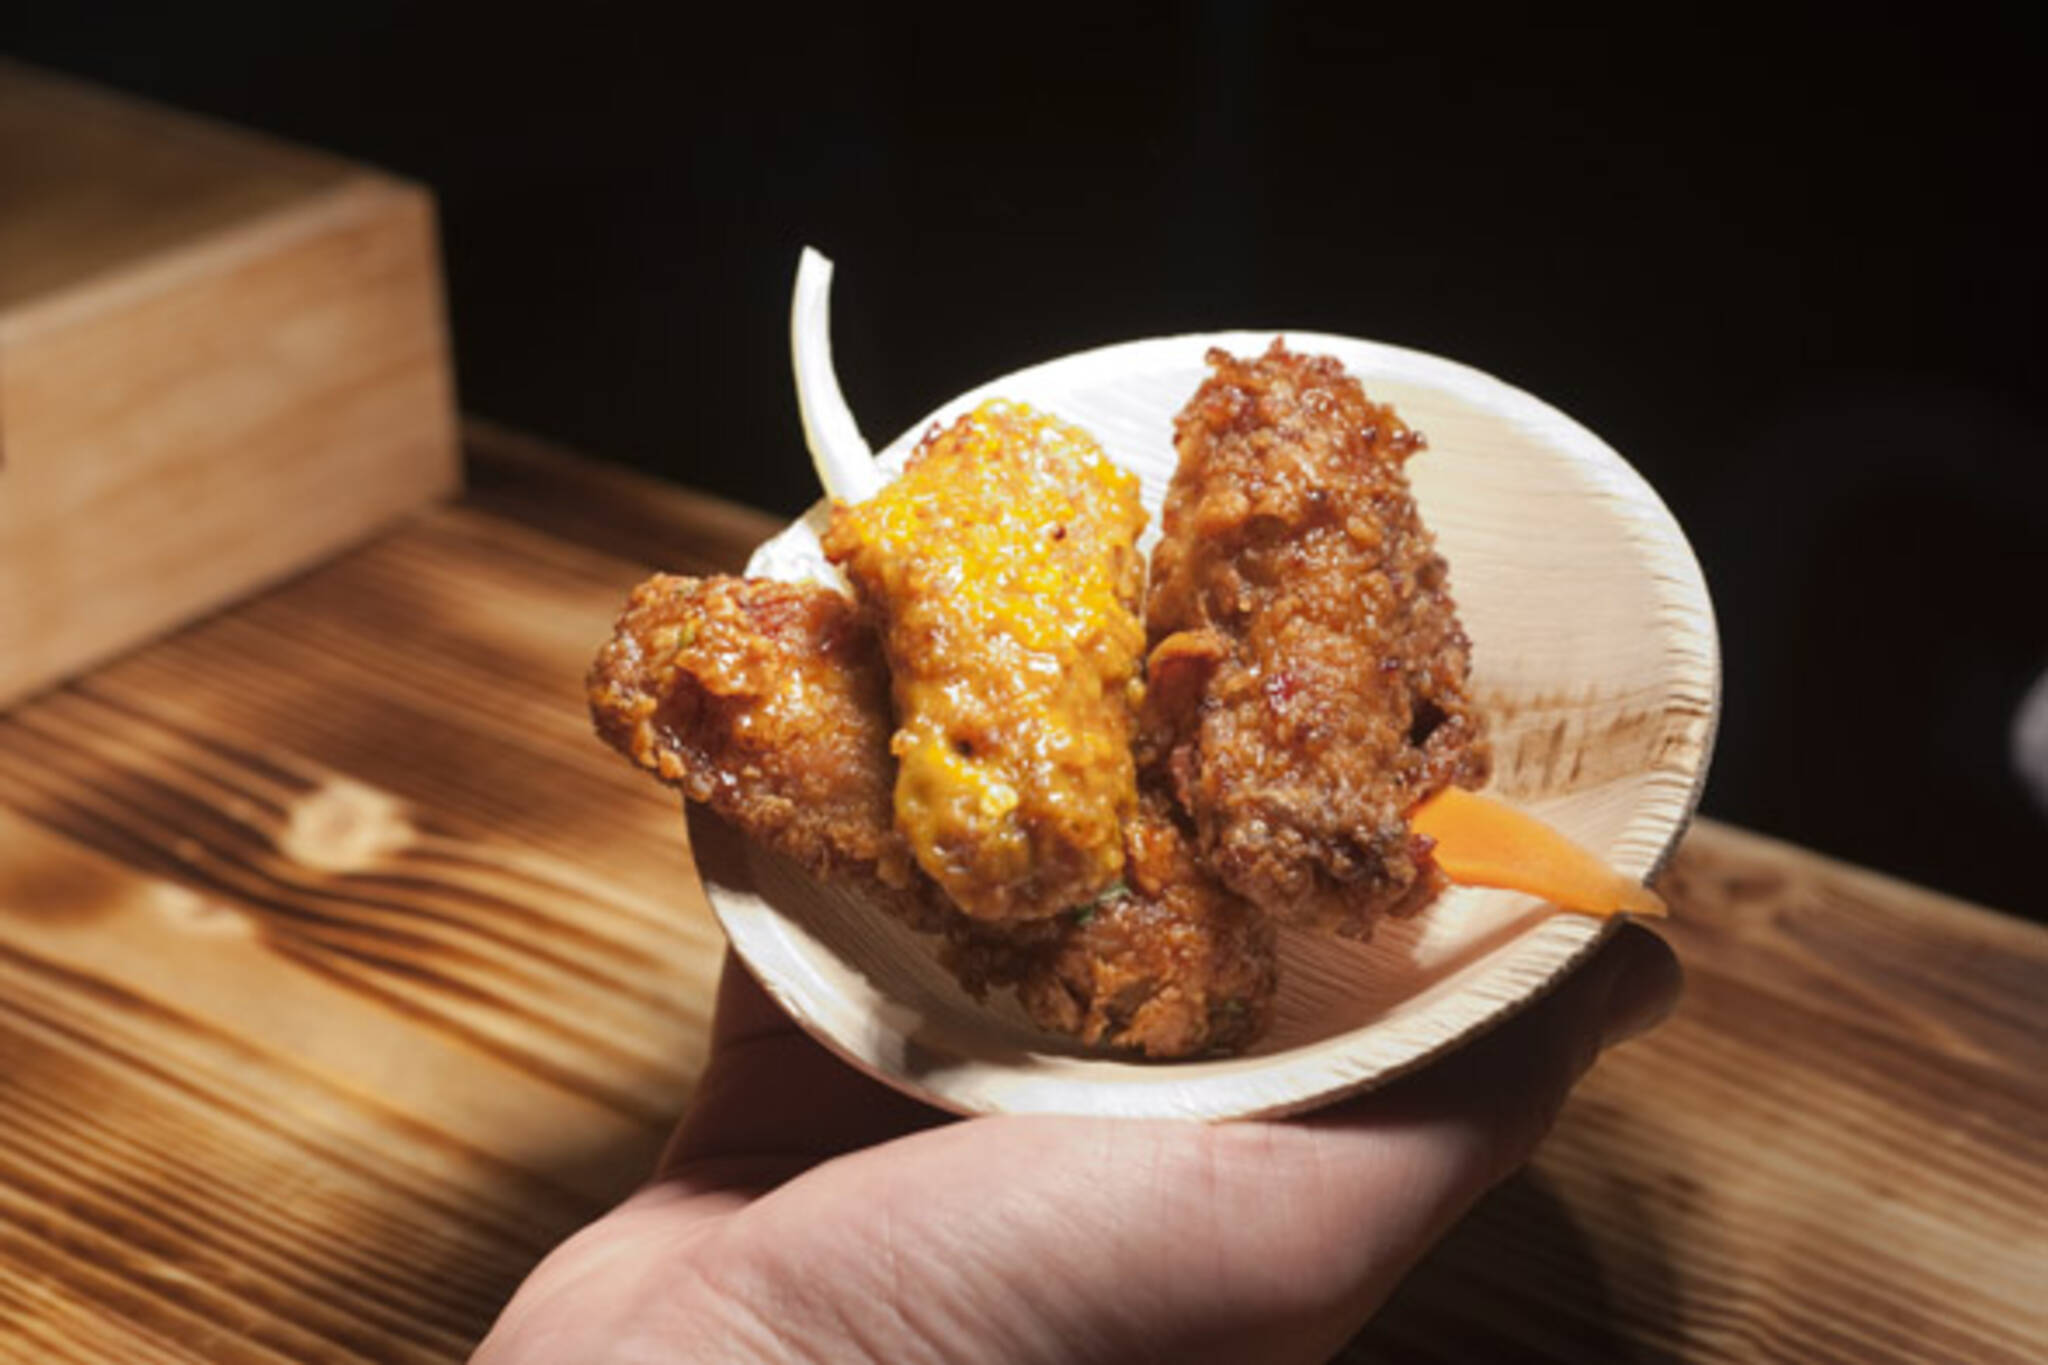 Toronto Wing Festival is back this summer